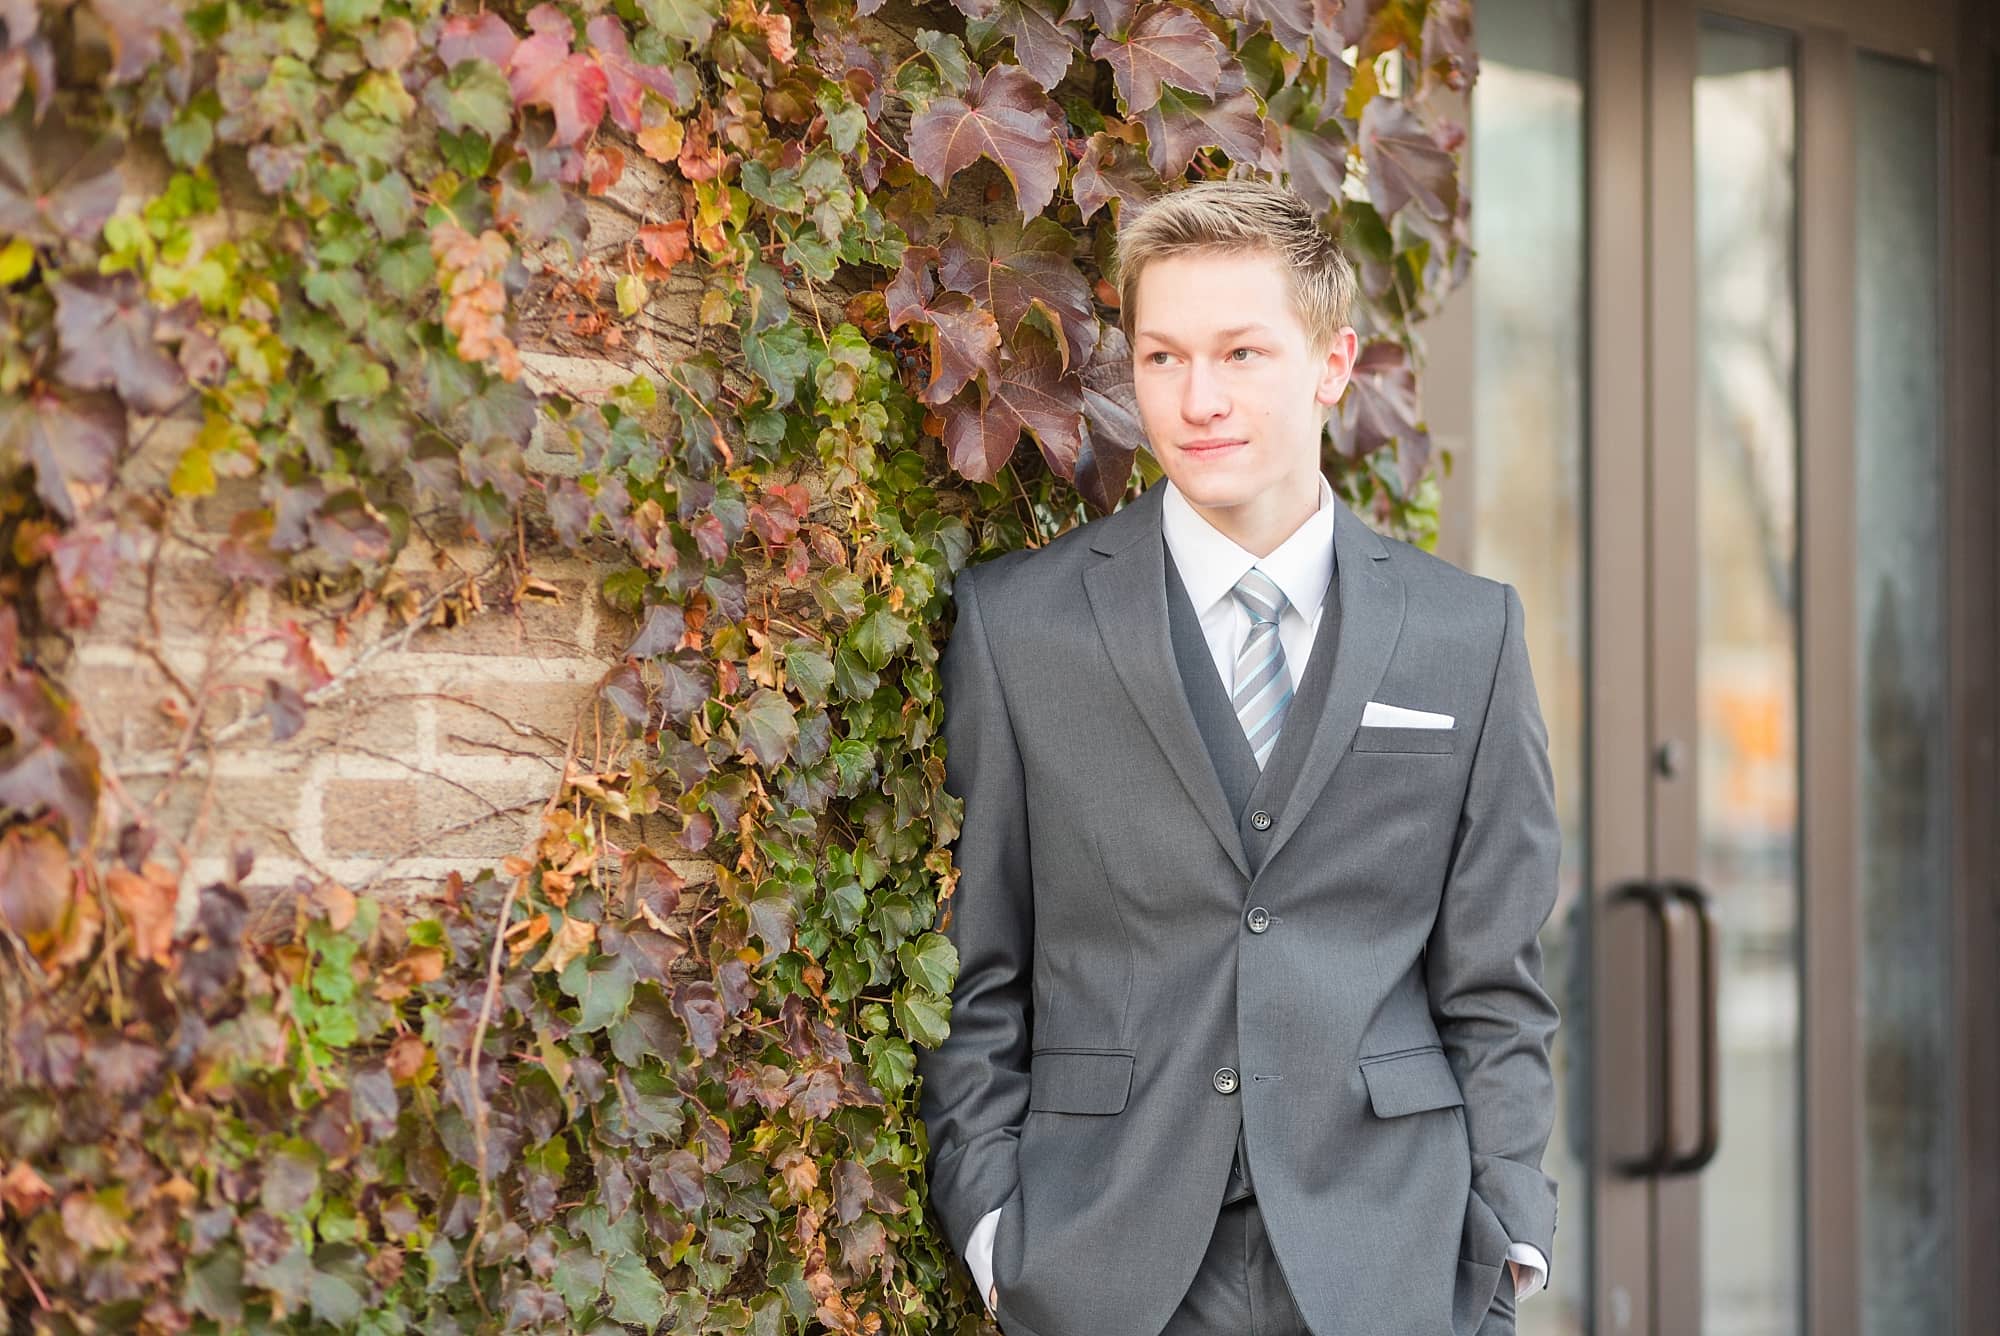 High School senior in grey suit and blue tie leans again colorful vines in Downtown Fargo